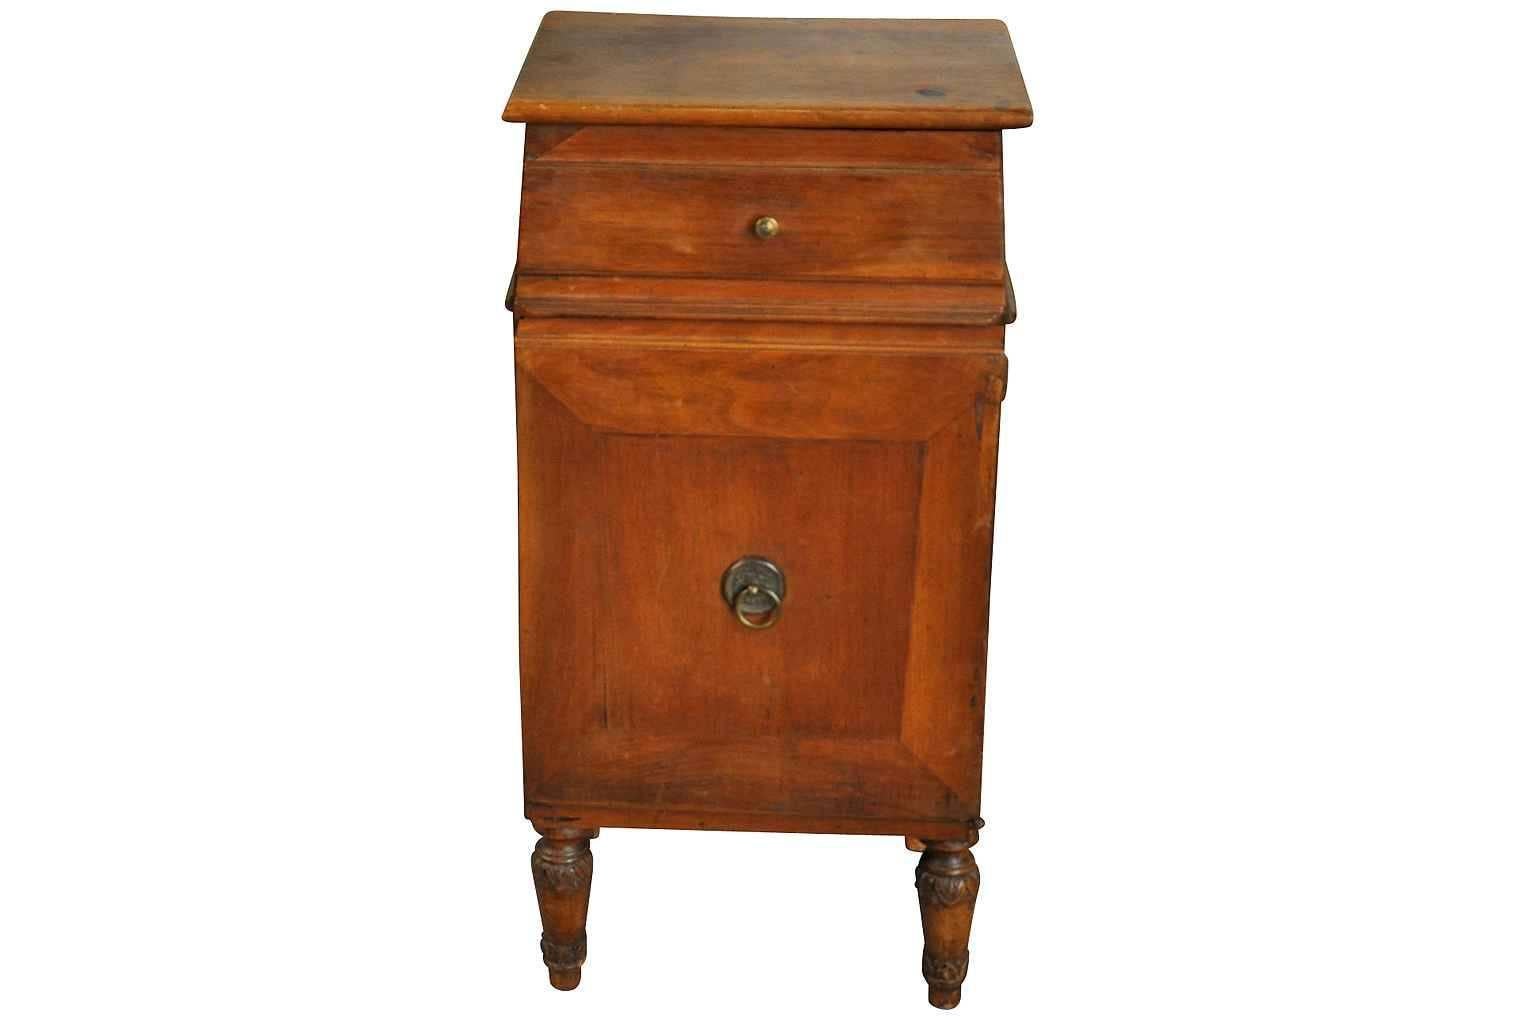 Early 19th century side cabinet or nightstand handsomely constructed from walnut. From Northern Italy.